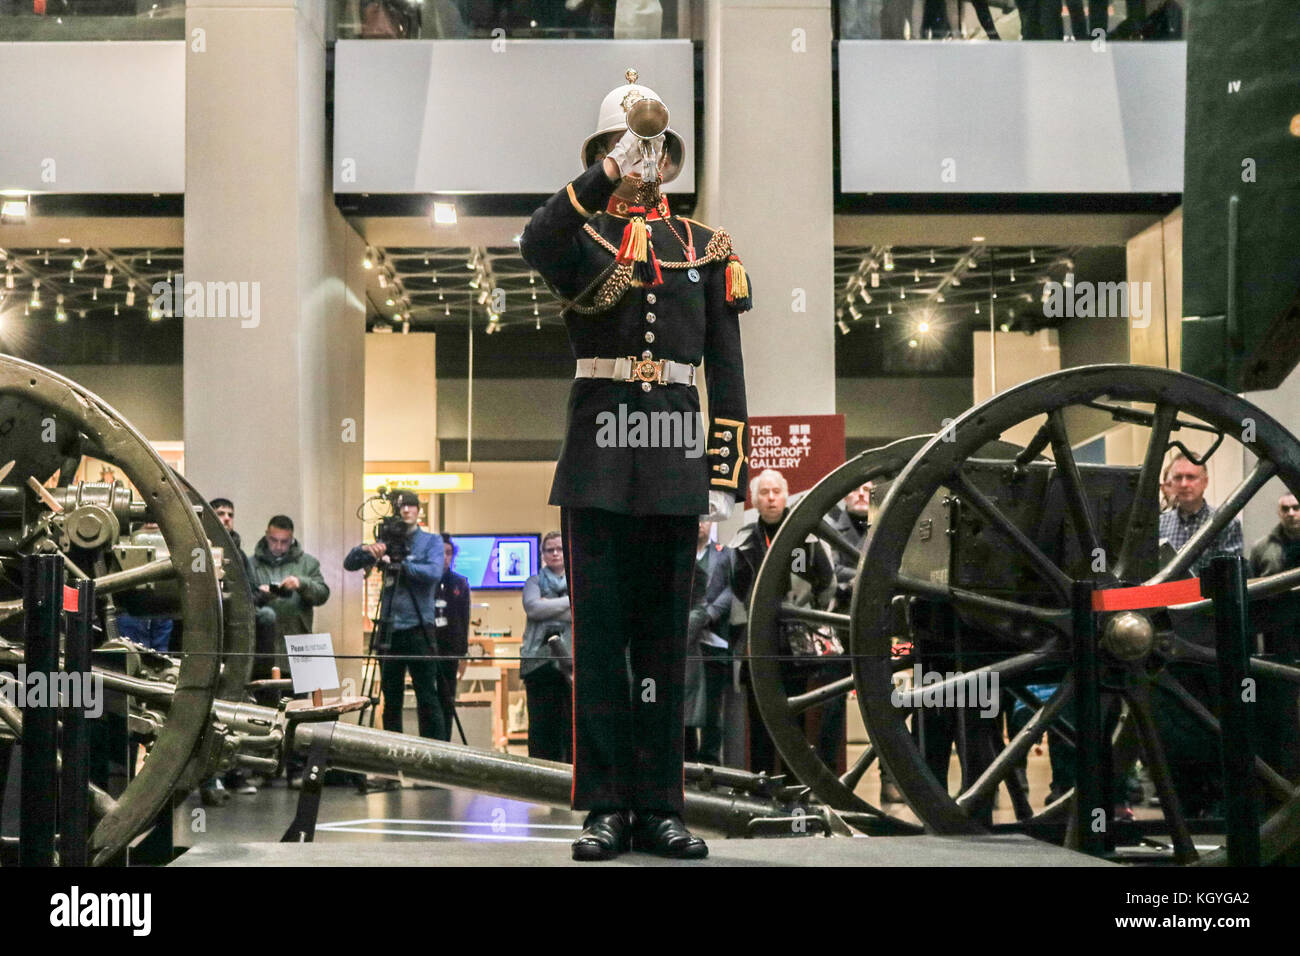 London, UK. 11th Nov, 2017. A Royal Marine Bugler plays the Last Post and Reveille at the Imperial War Museum London before the two minute silence observance as part of Armistice Day which is commemorated every year on 11 November to mark end of the First World War and the armistice signed between the Allies of World War I and Germany Credit: amer ghazzal/Alamy Live News Stock Photo